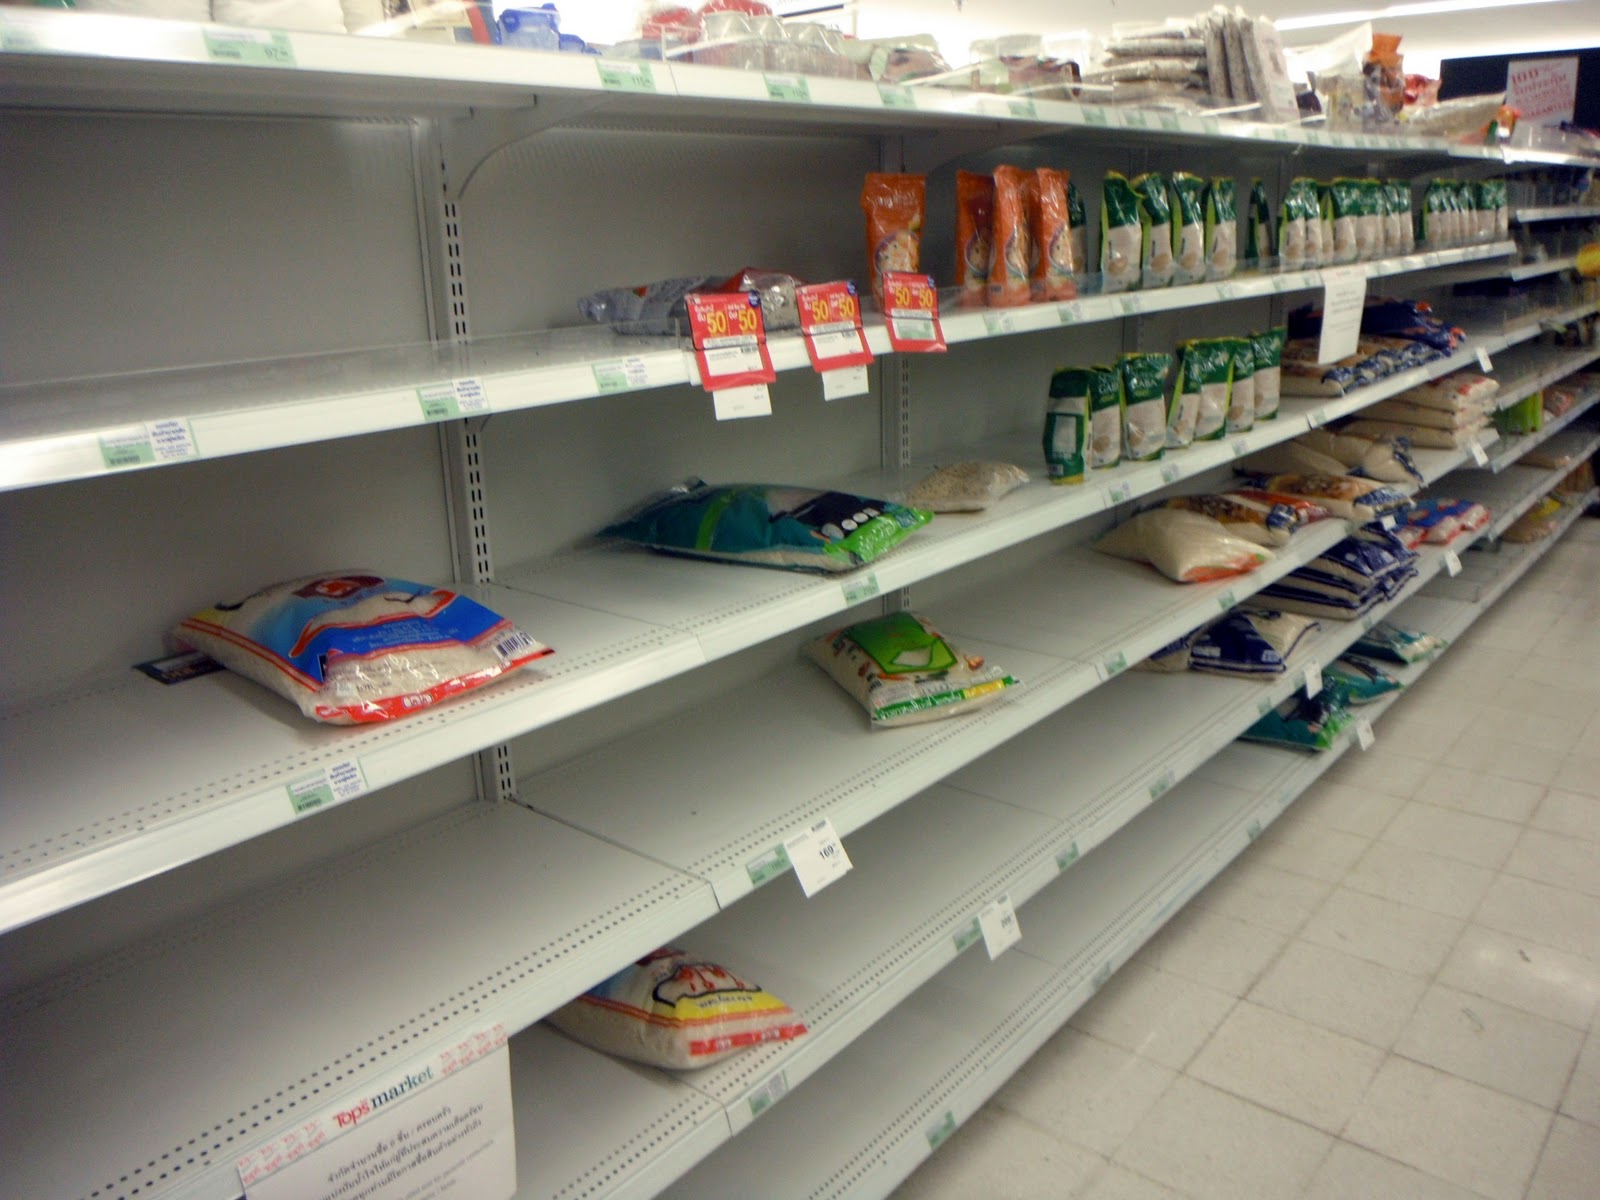 Are you Prepared for Food Shortages?